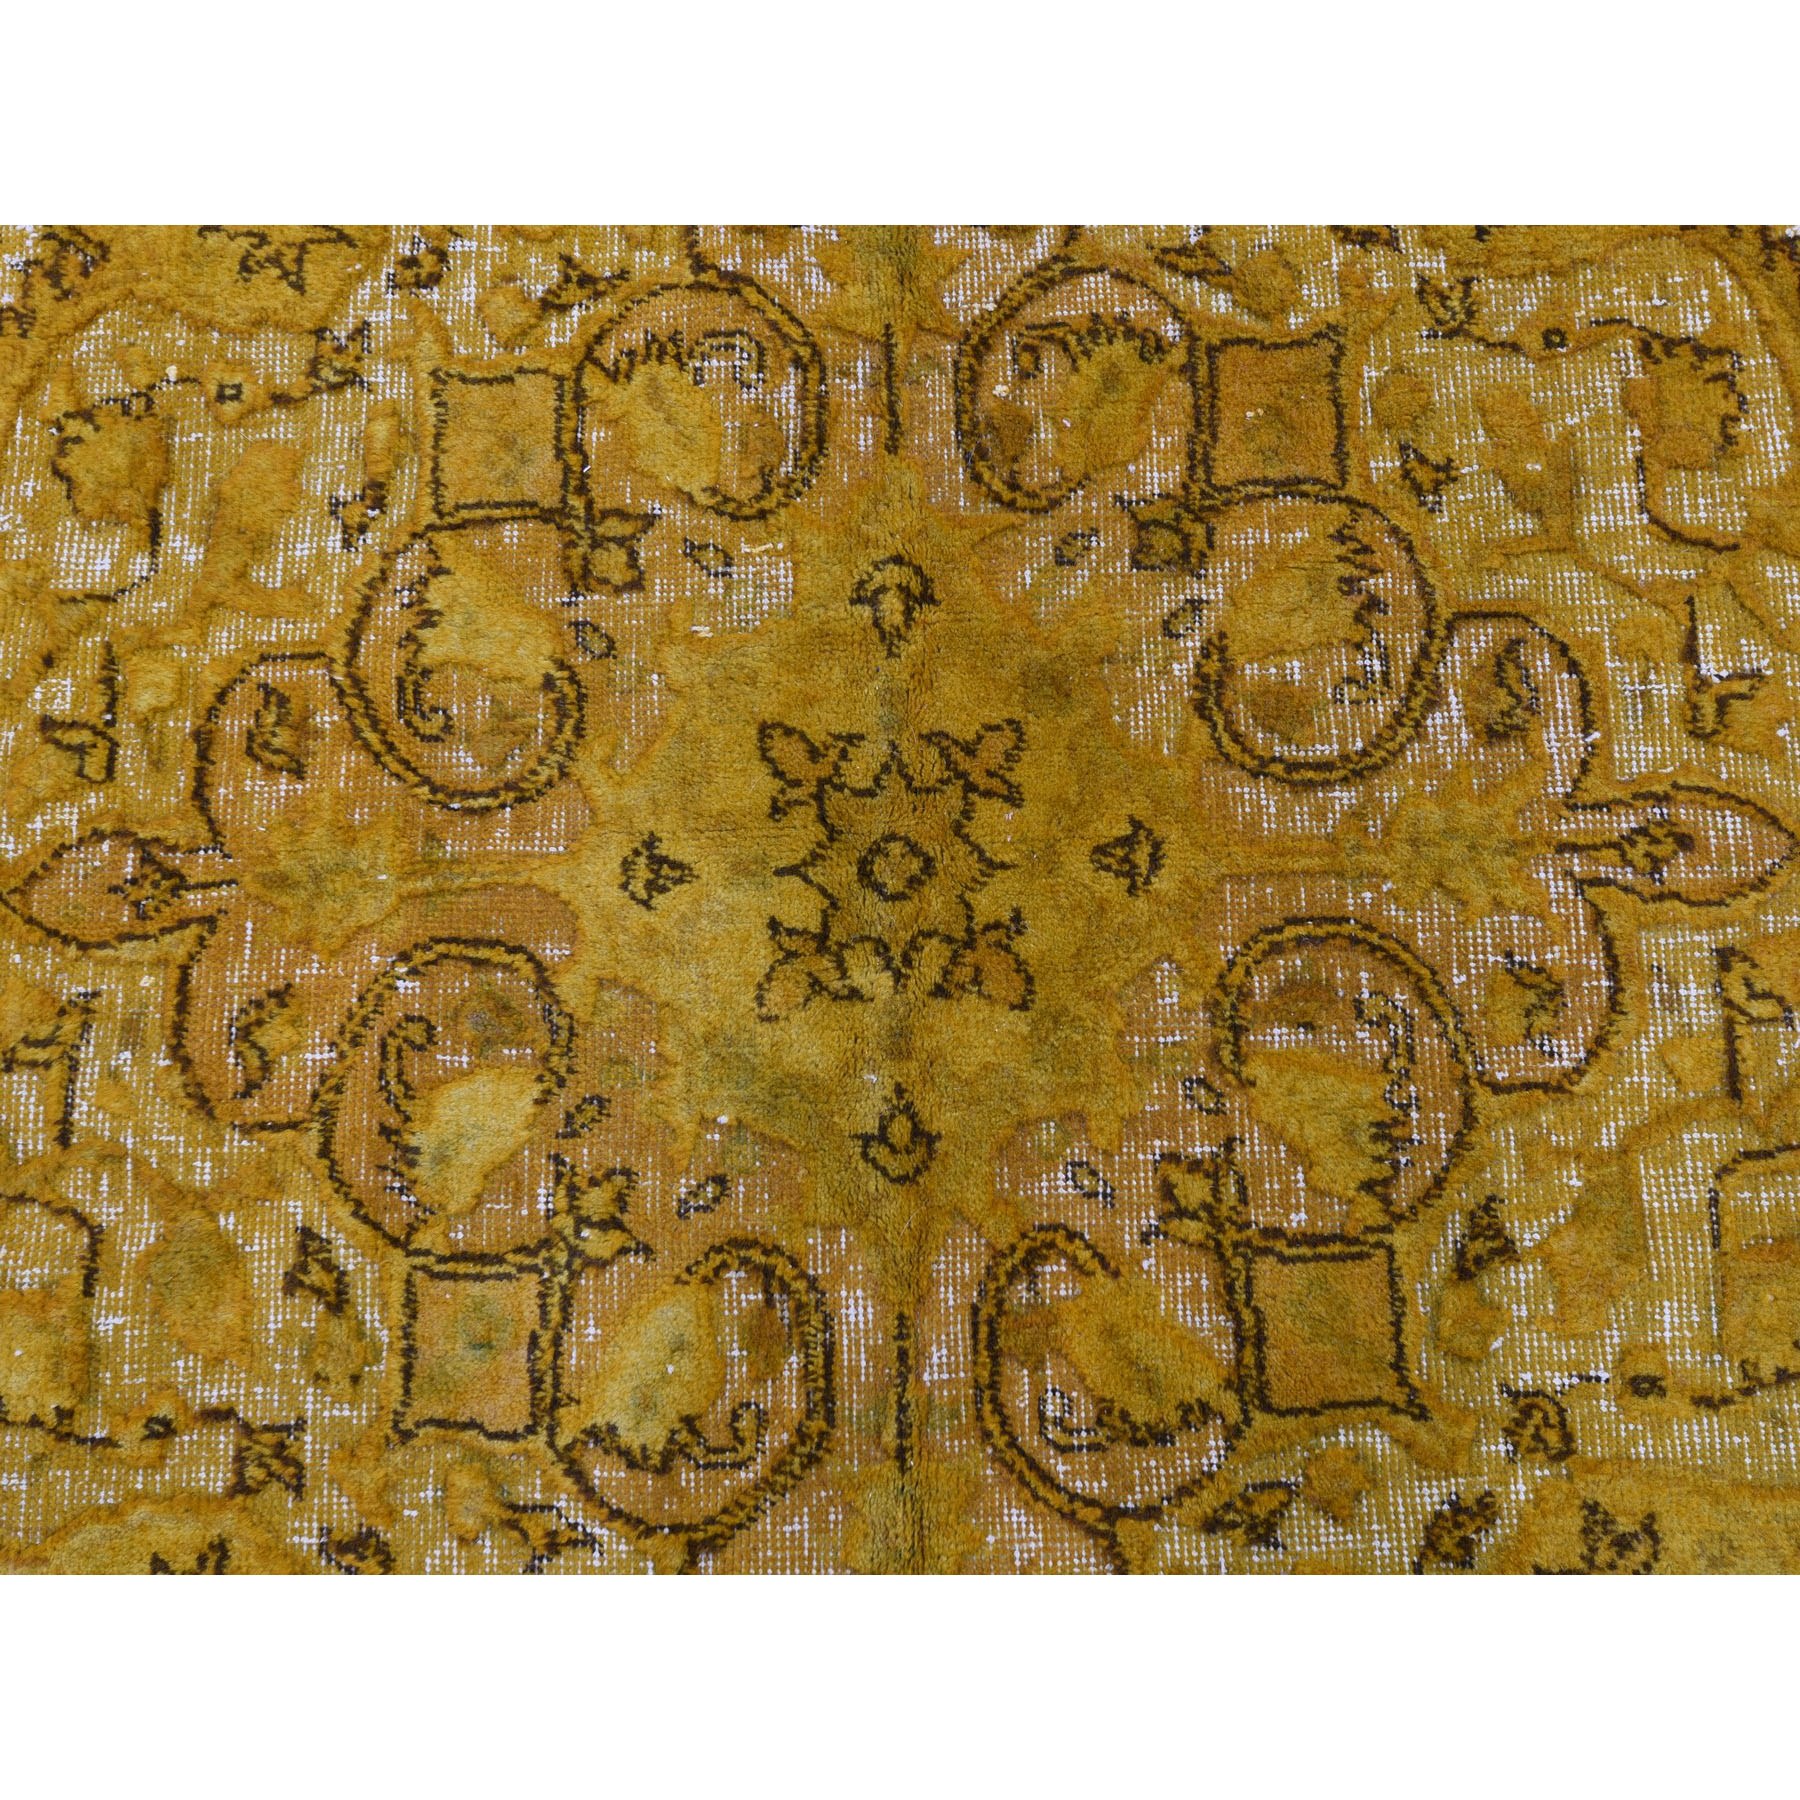 8-6 x12-3  Yellow Overdyed Turkish Sivas Hi-Lo Pile Pure Wool Hand Knotted Oriental Rug 